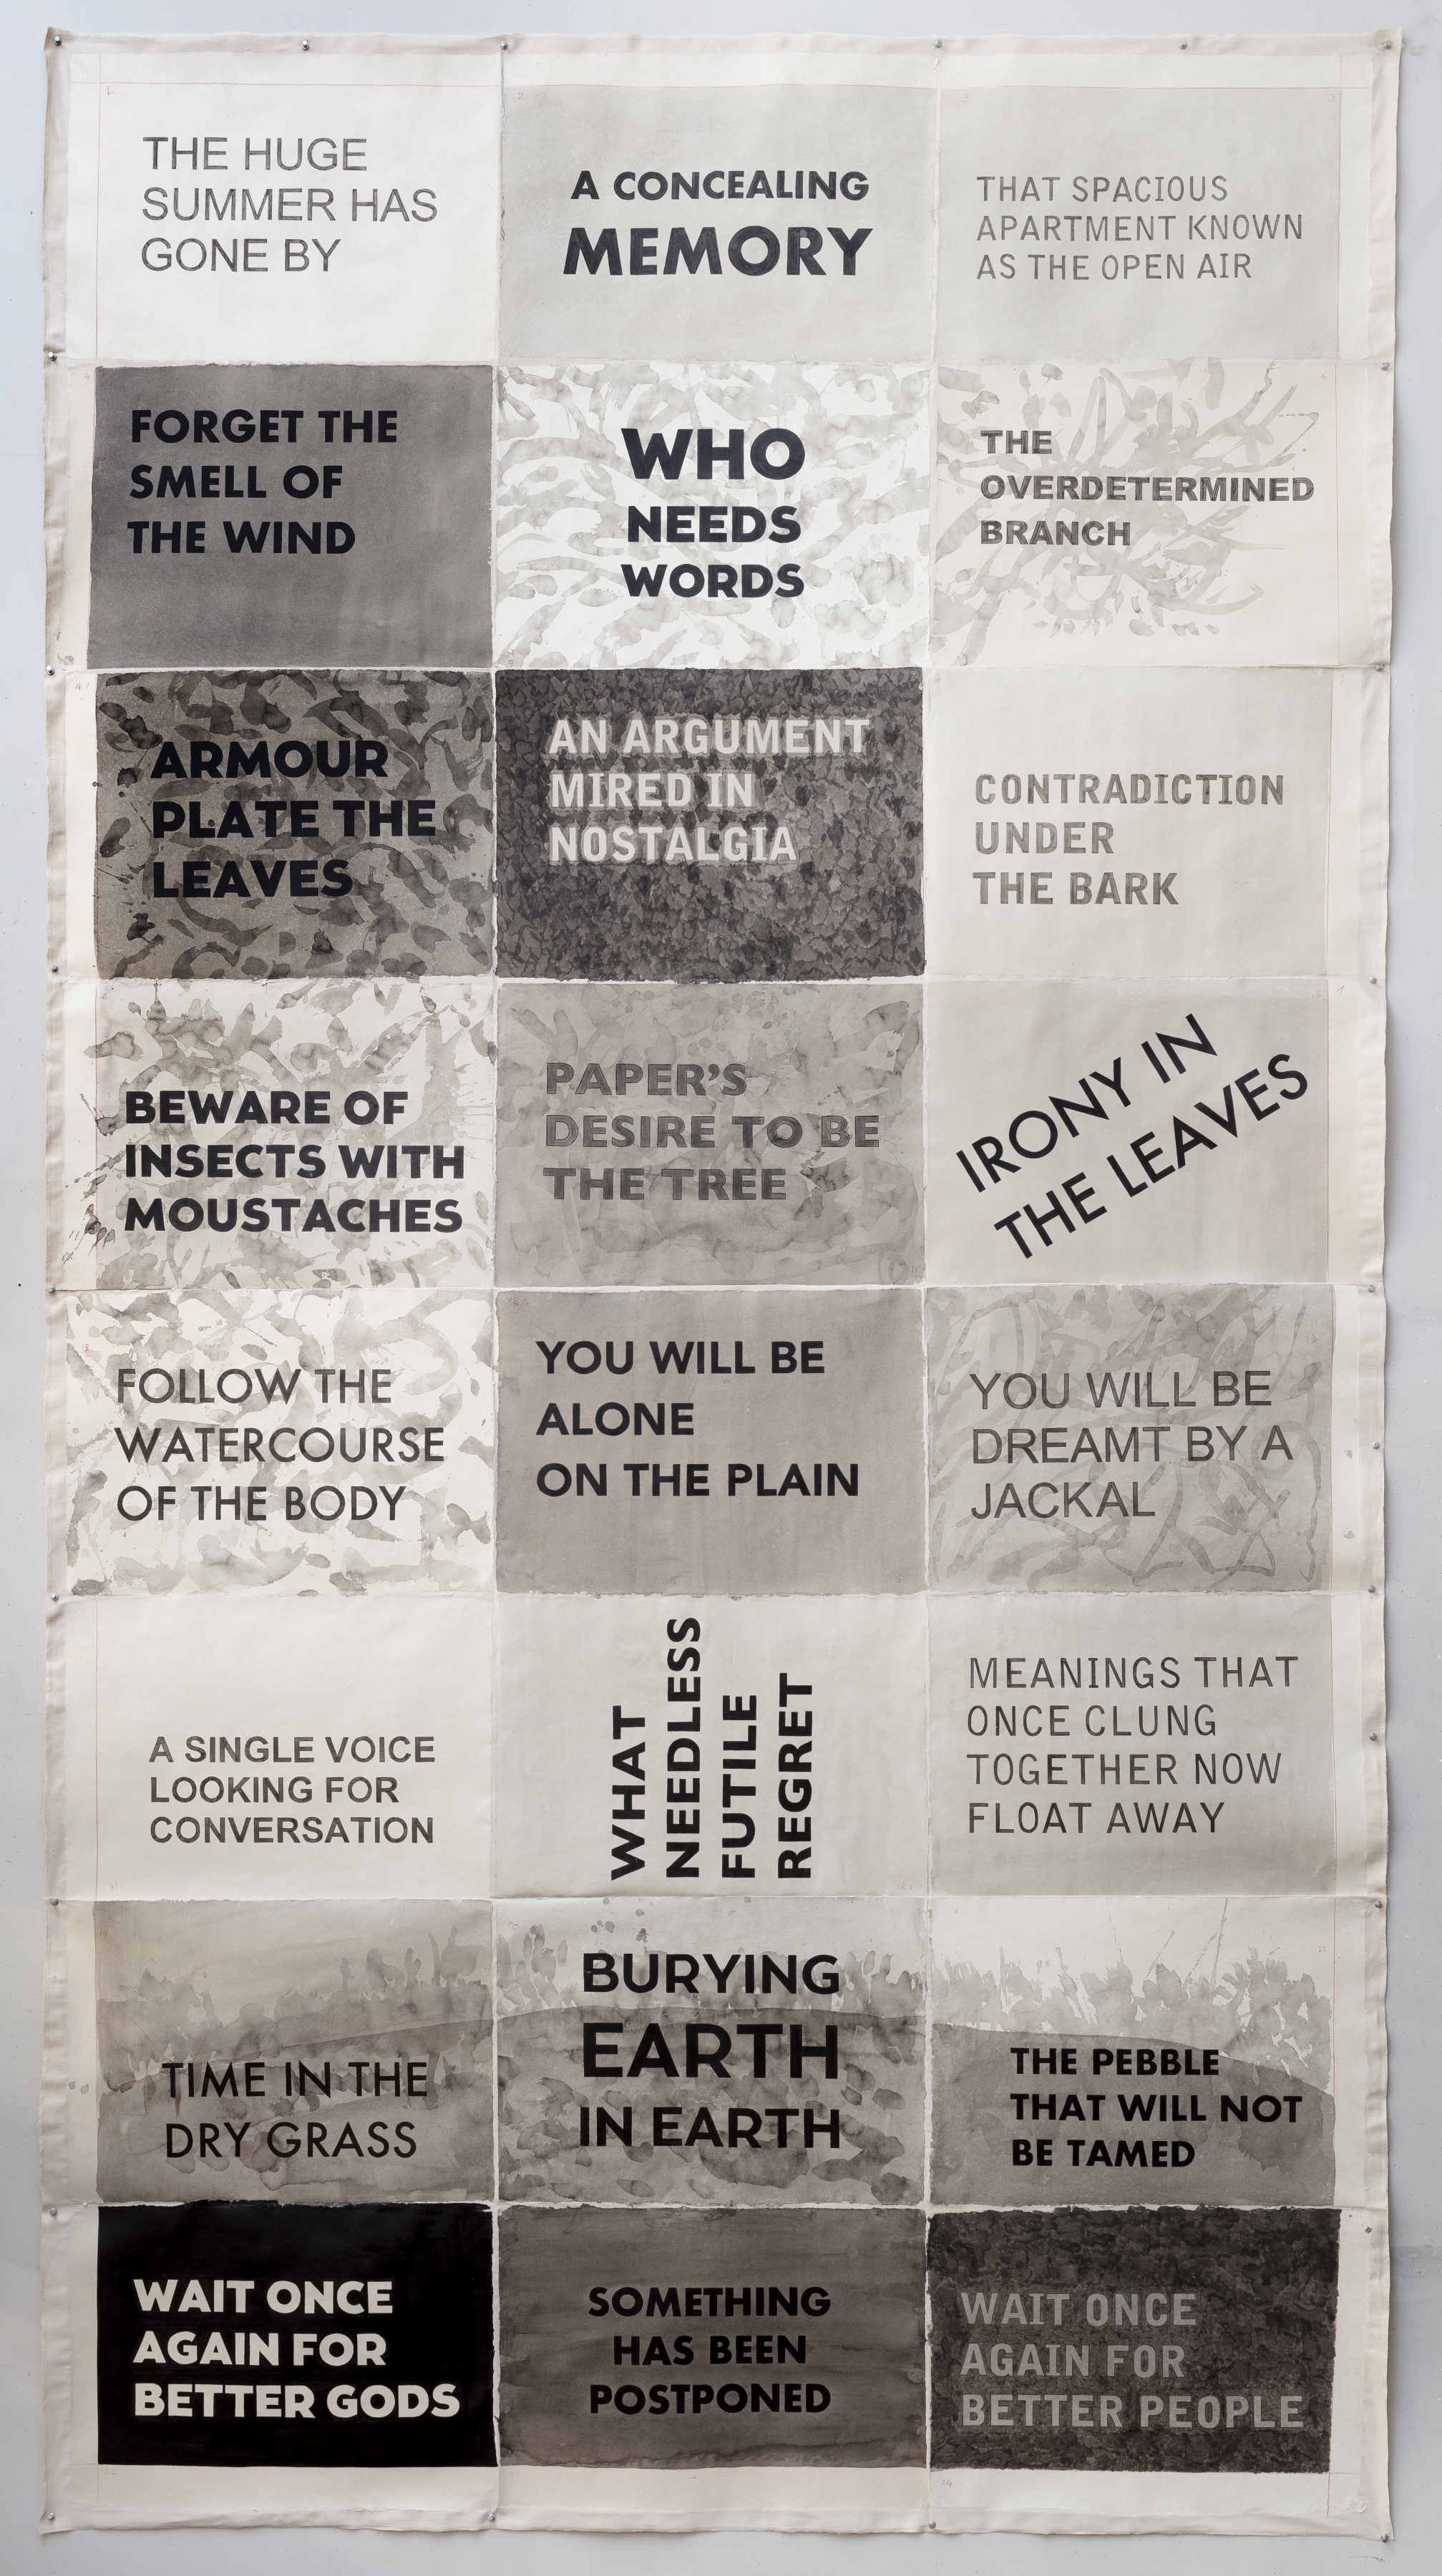 William Kentridge

Concealing Memory, 2021

Indian ink on paper, mounted to canvas fabric

348 x 188 cm

&nbsp;

Sales enquiries